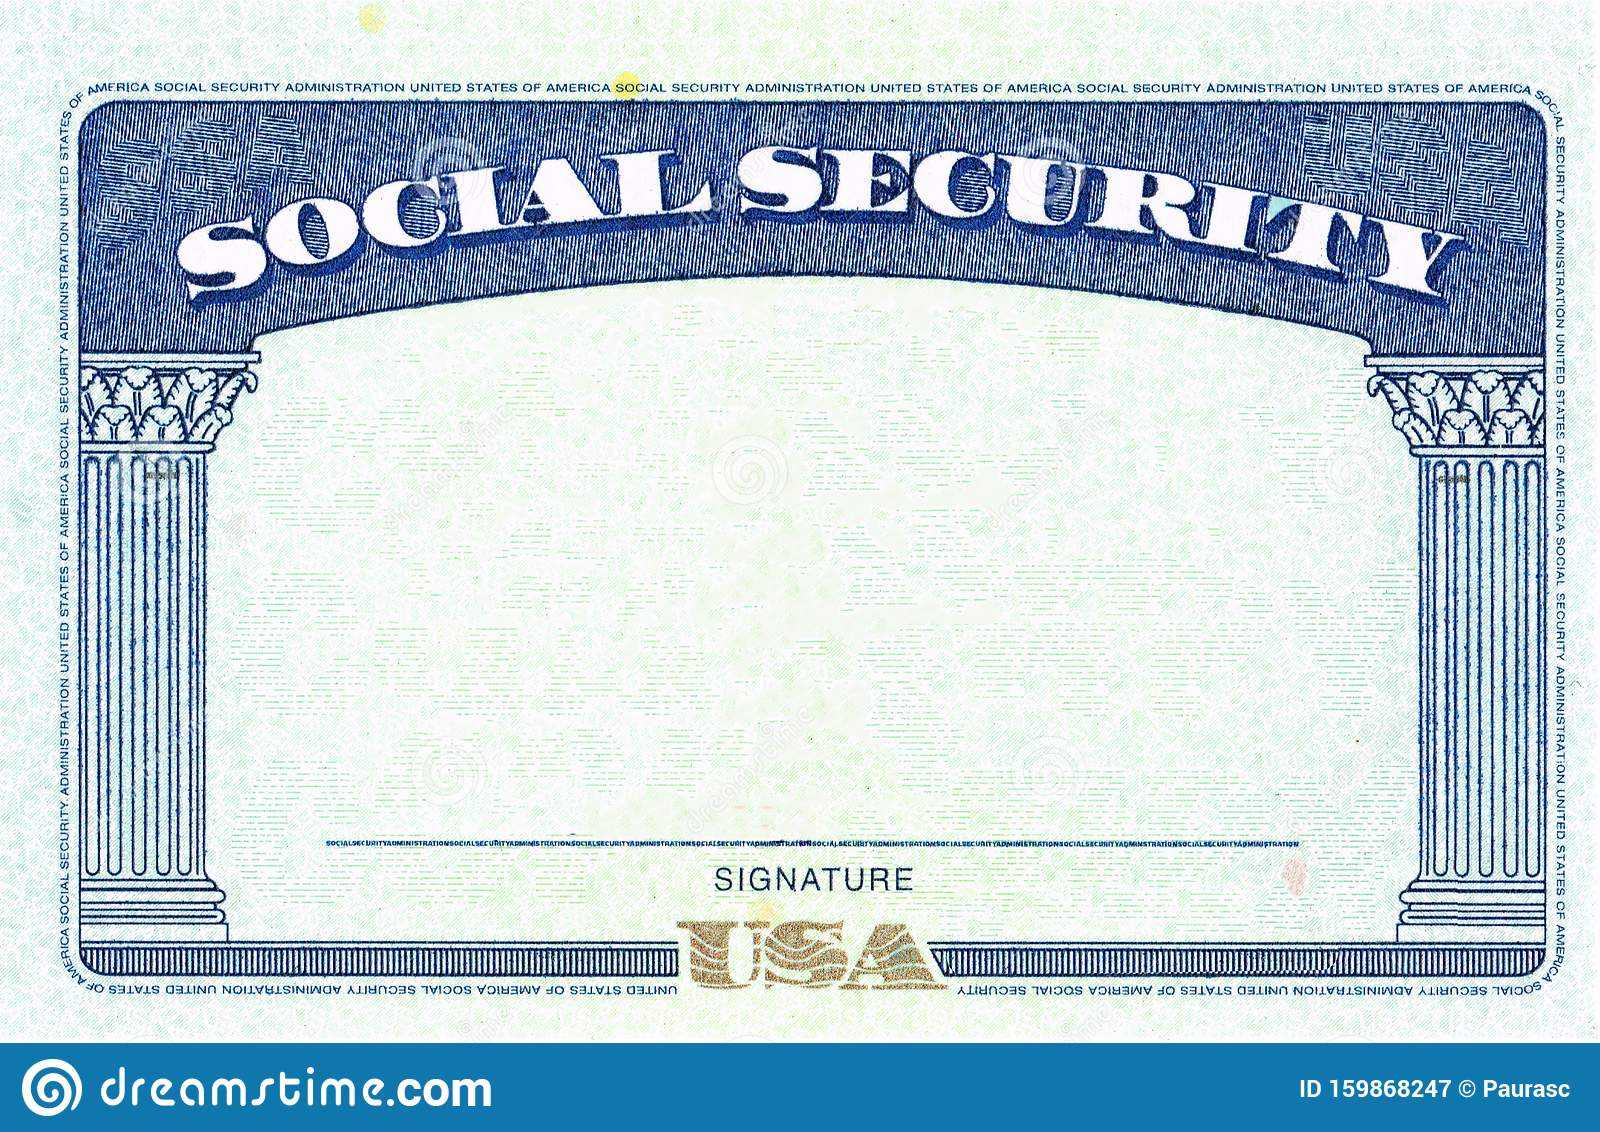 Social Security Card Blank Stock Image. Image Of Emigration In Blank Social Security Card Template Download